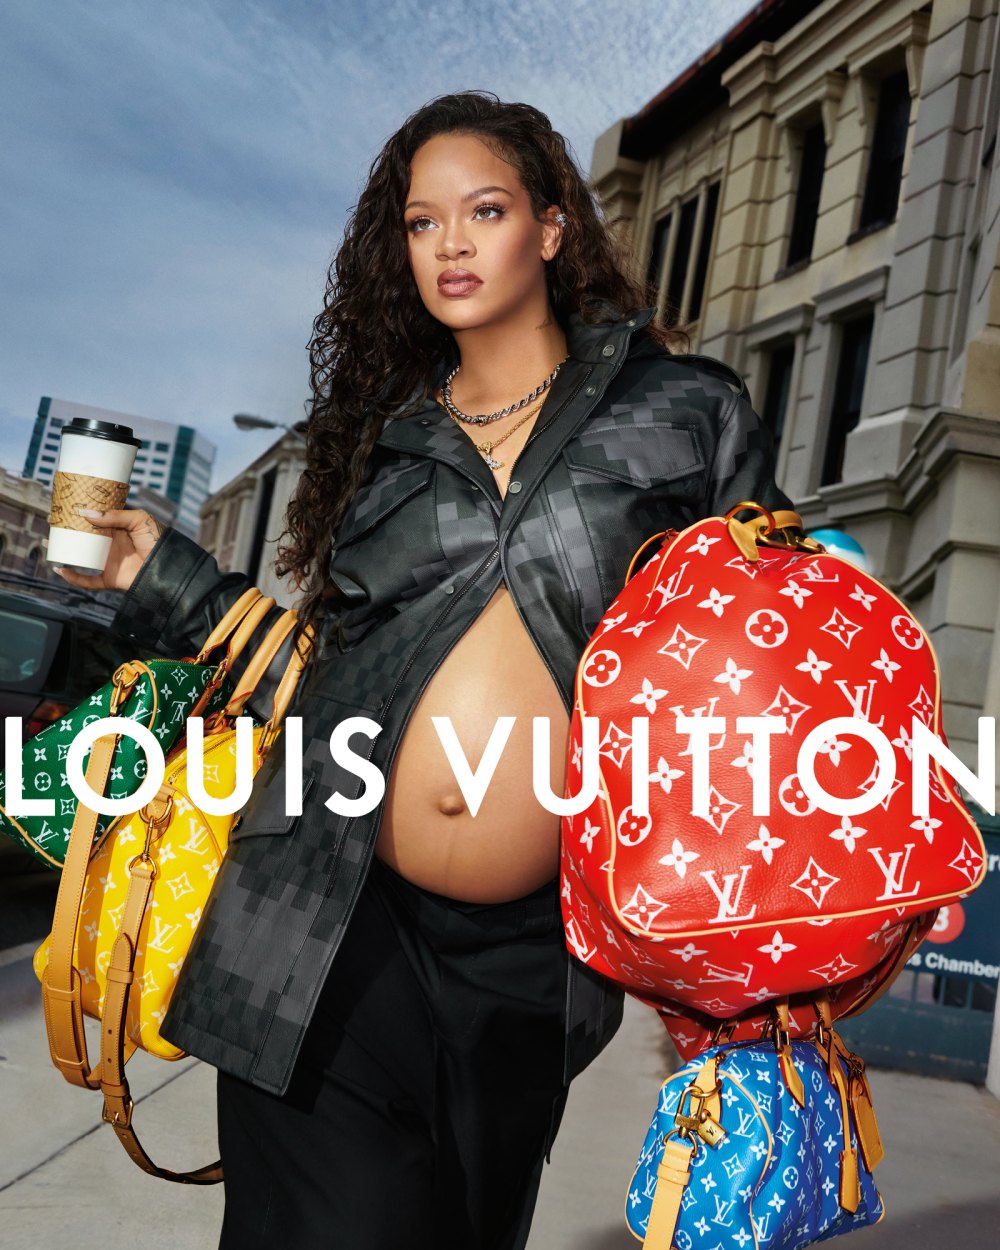 RETURNING A LOUIS VUITTON: TIPS AND DO'S AND DON'TS TO AVOID REJECTION 